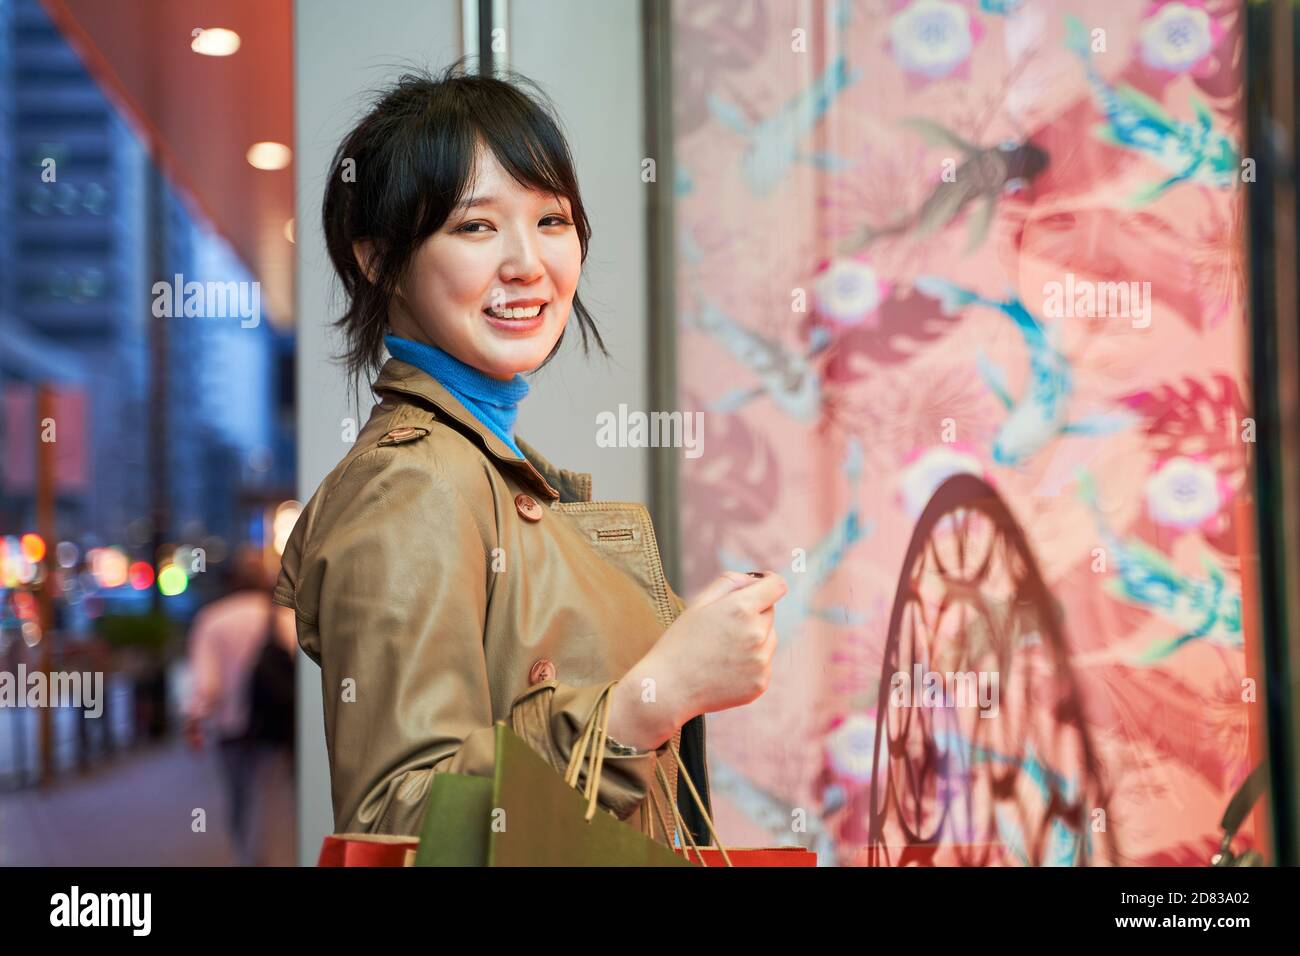 beautiful happy young asian woman shopper standing in front of shop window in modern city Stock Photo